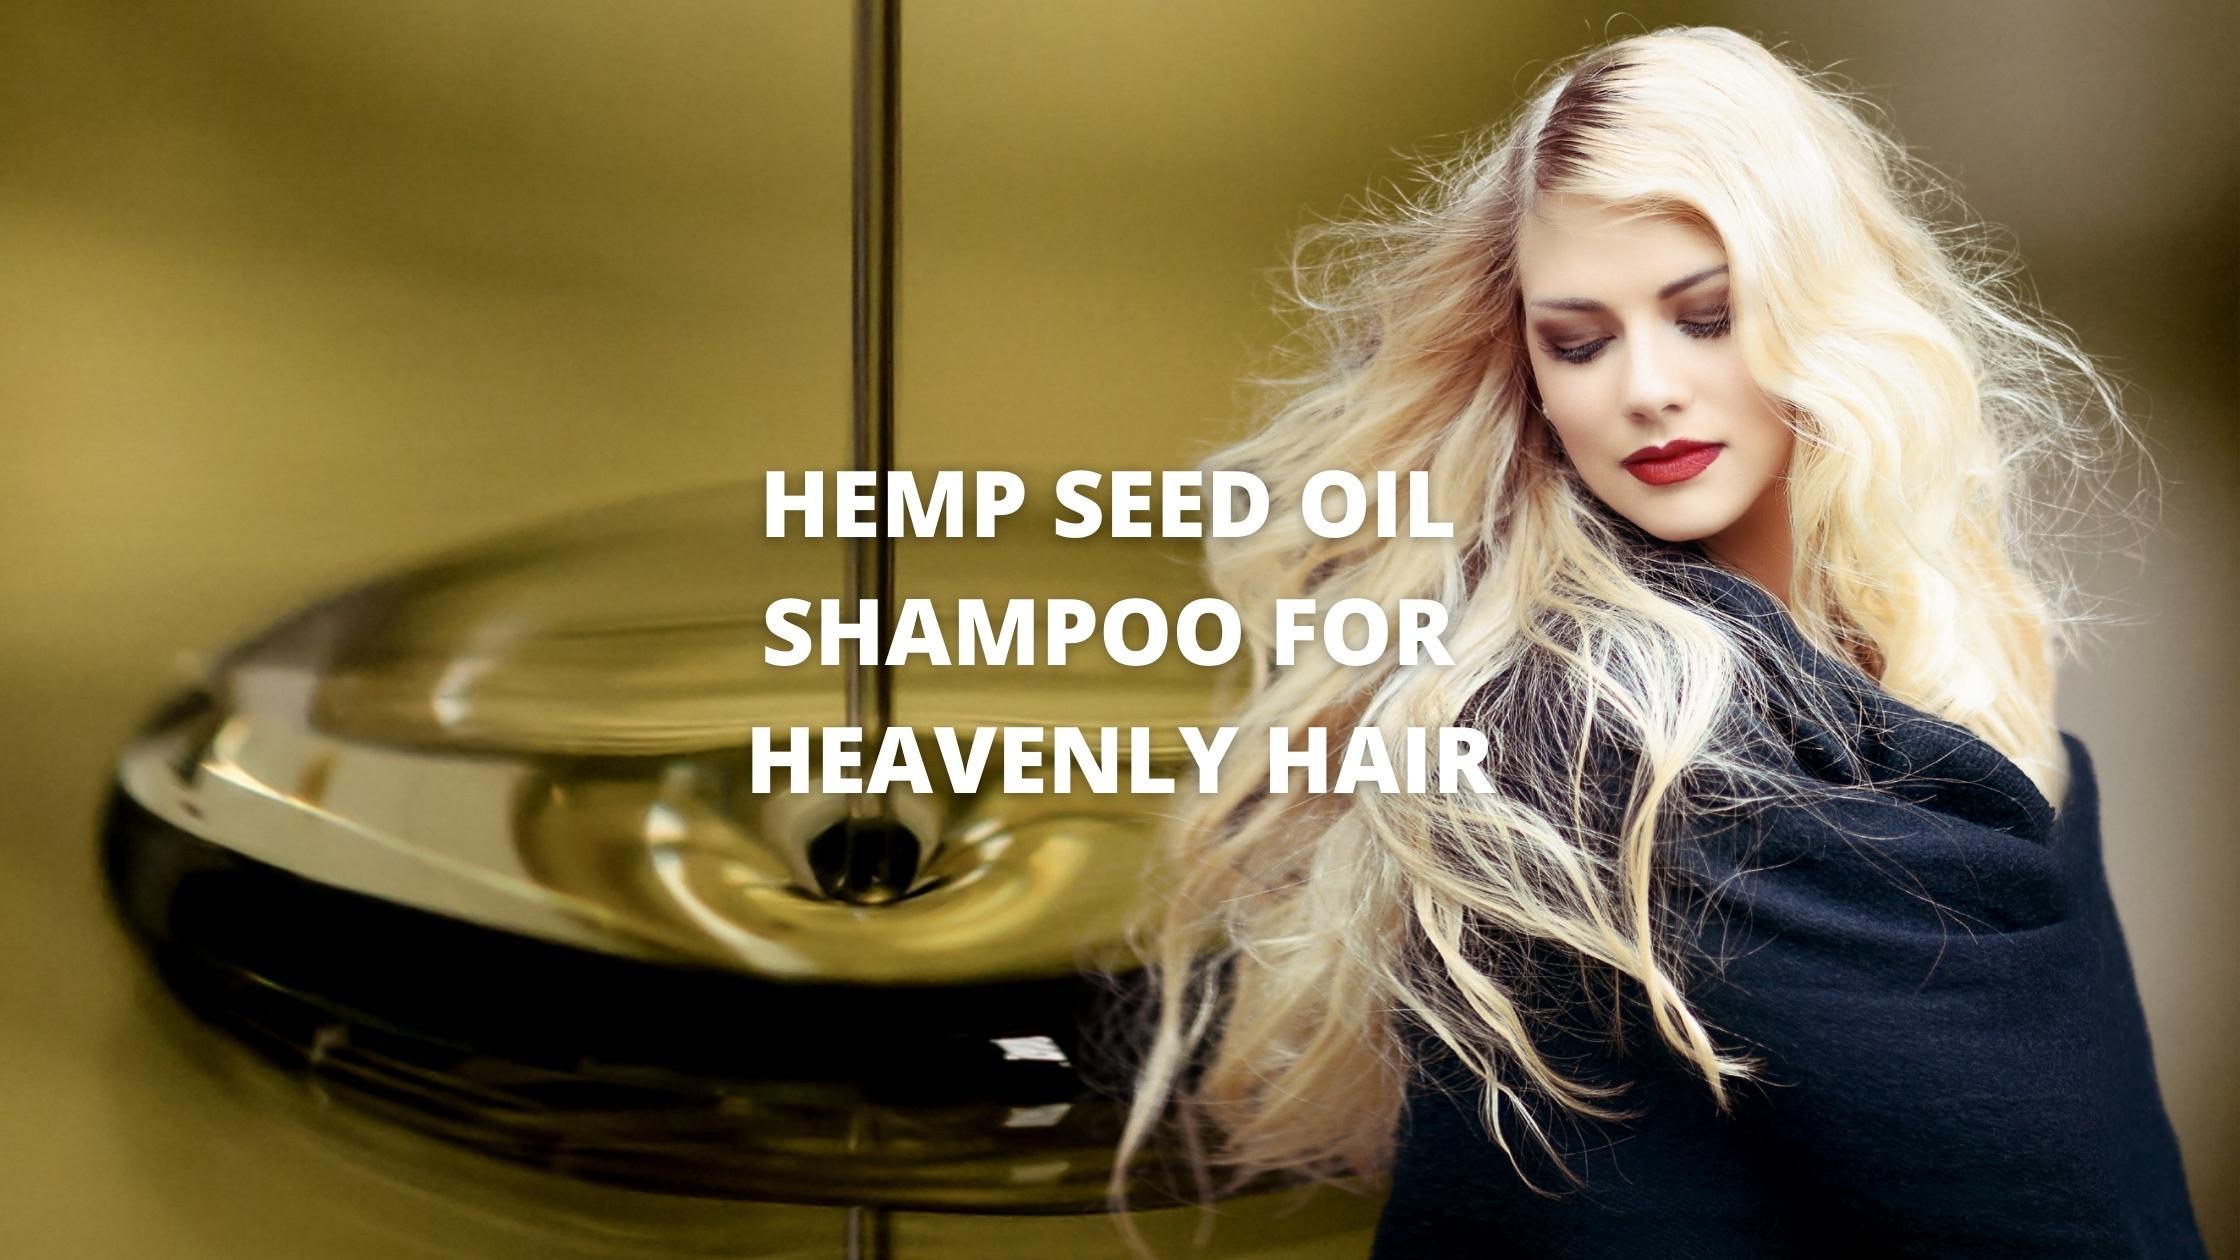 5 Benefits of Hemp Seed Oil for Hair: How to Use – VedaOils USA